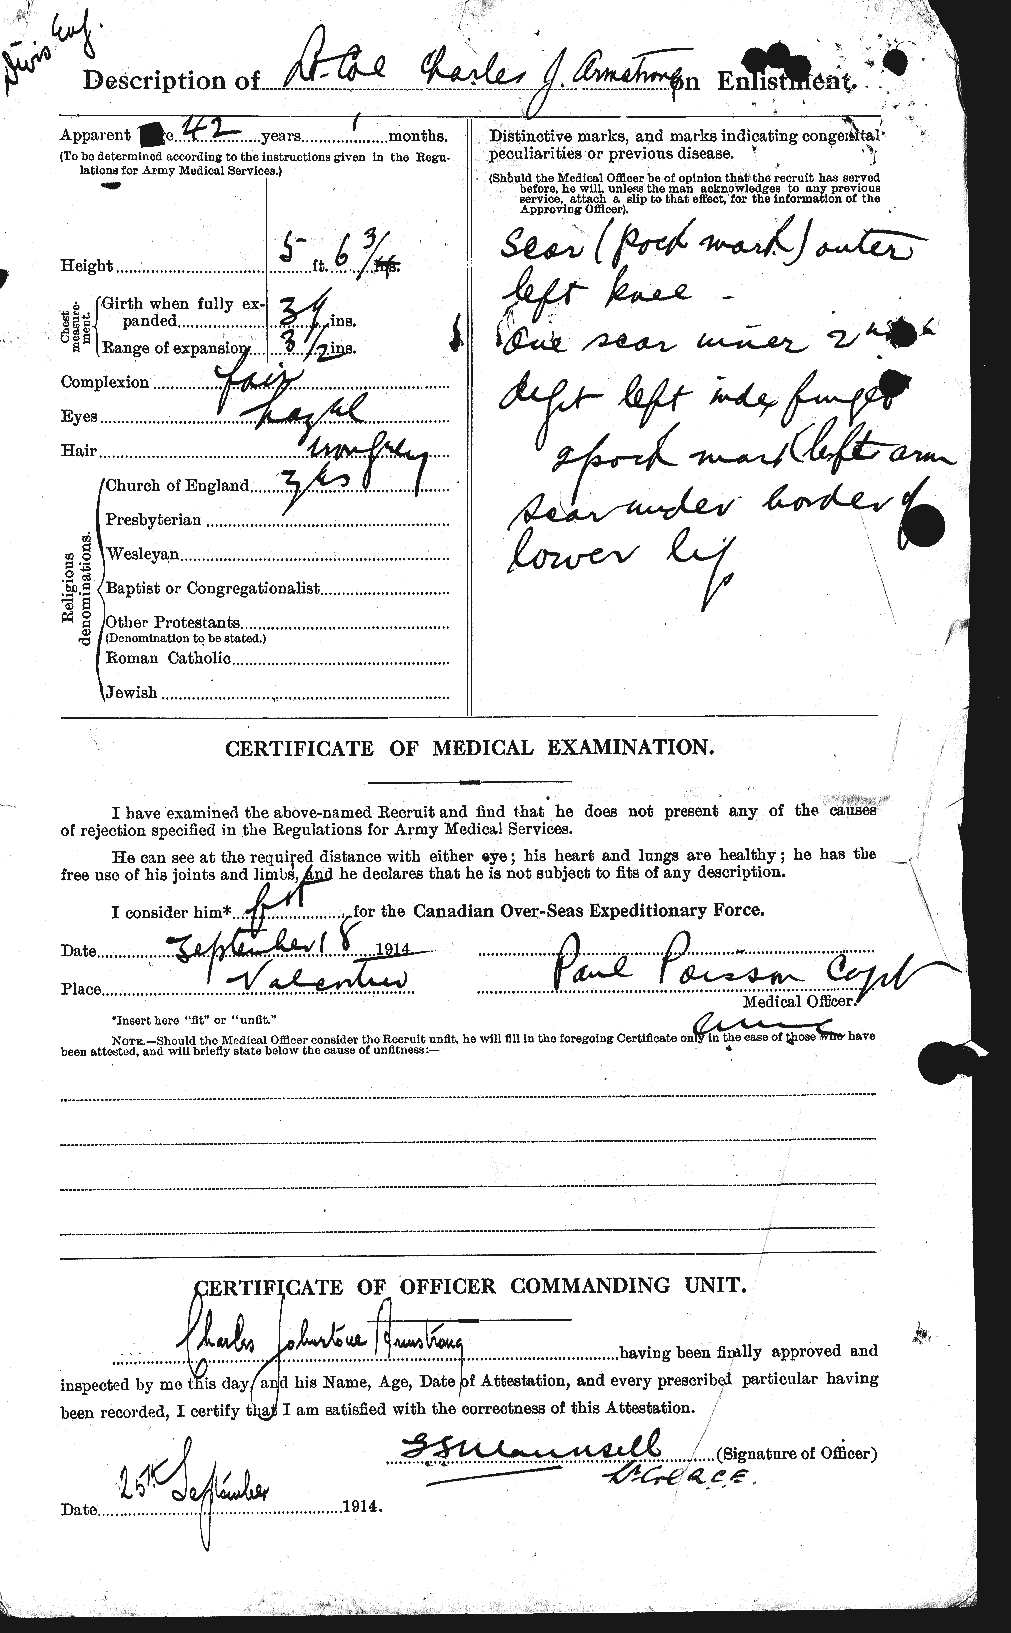 Personnel Records of the First World War - CEF 213906b